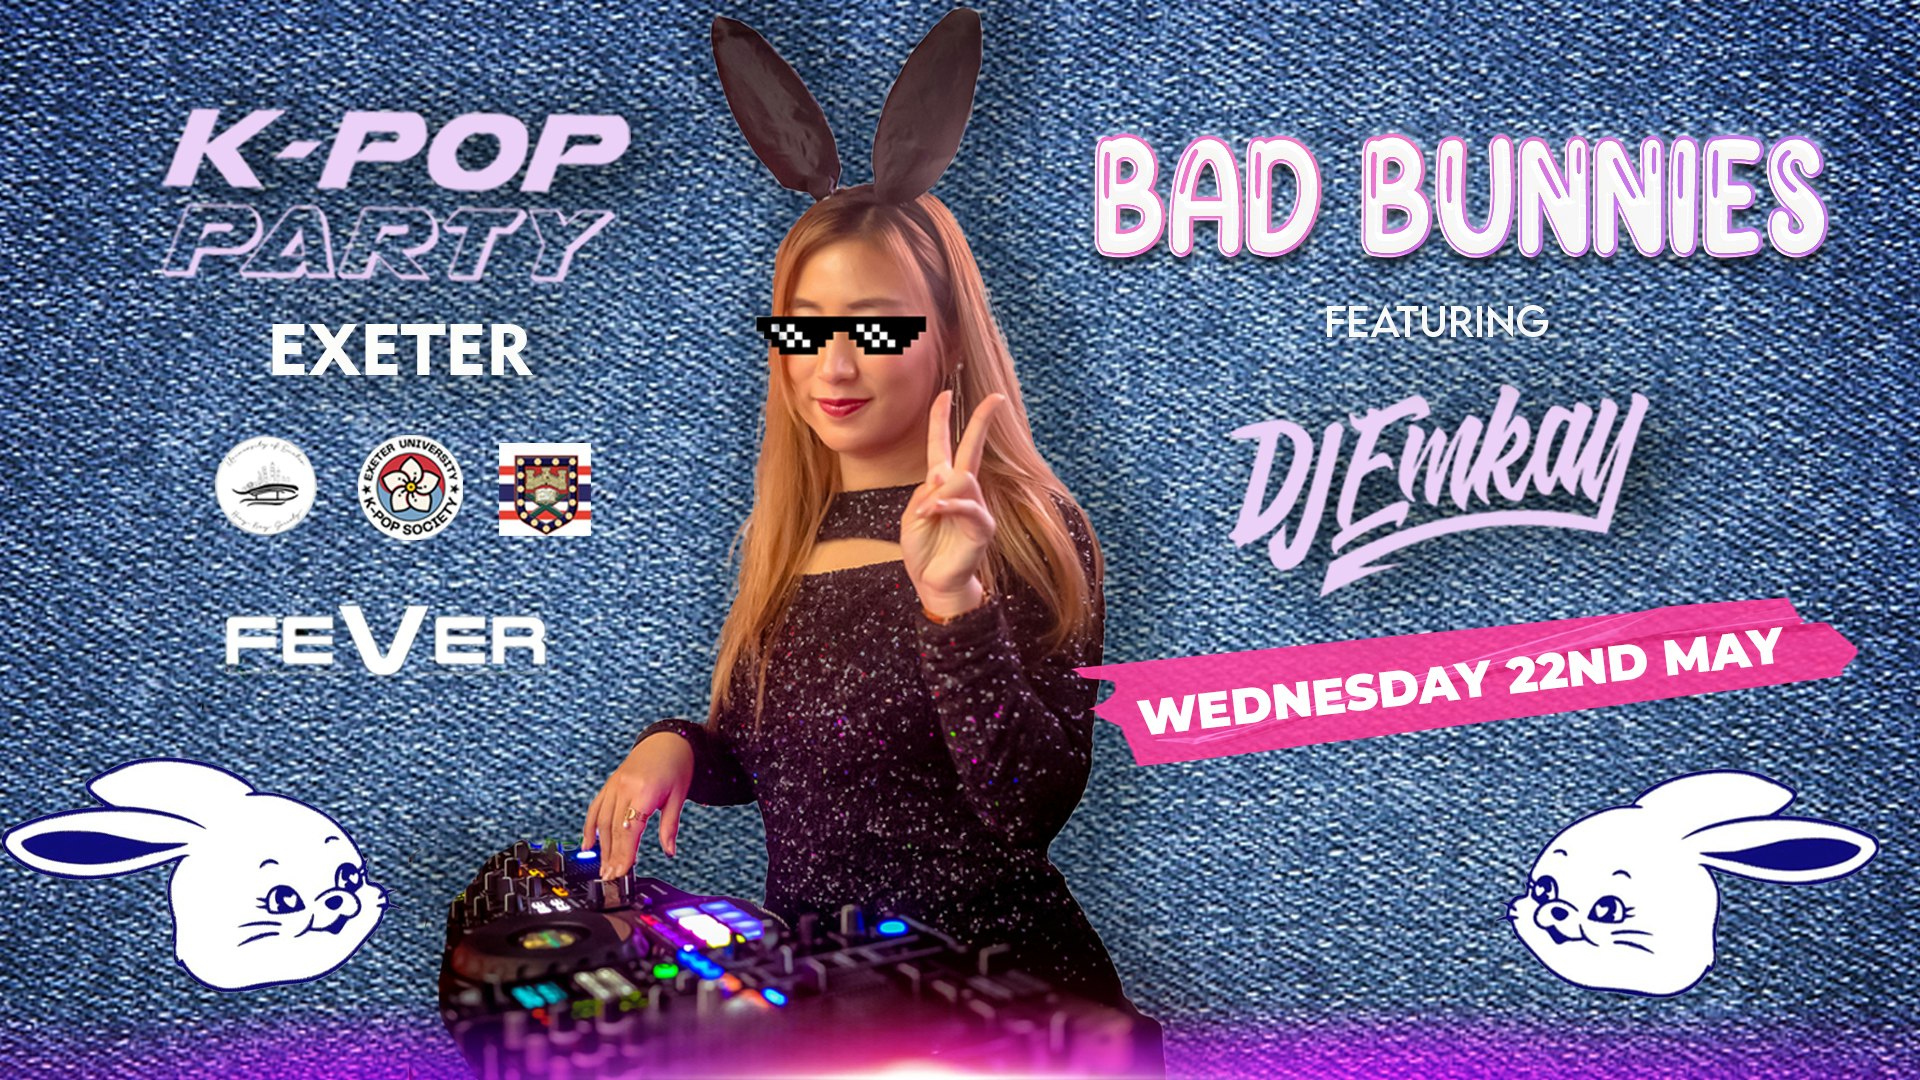 K-Pop BAD BUNNIES Party Exeter with DJ EMKAY – Wednesdsay 22nd May